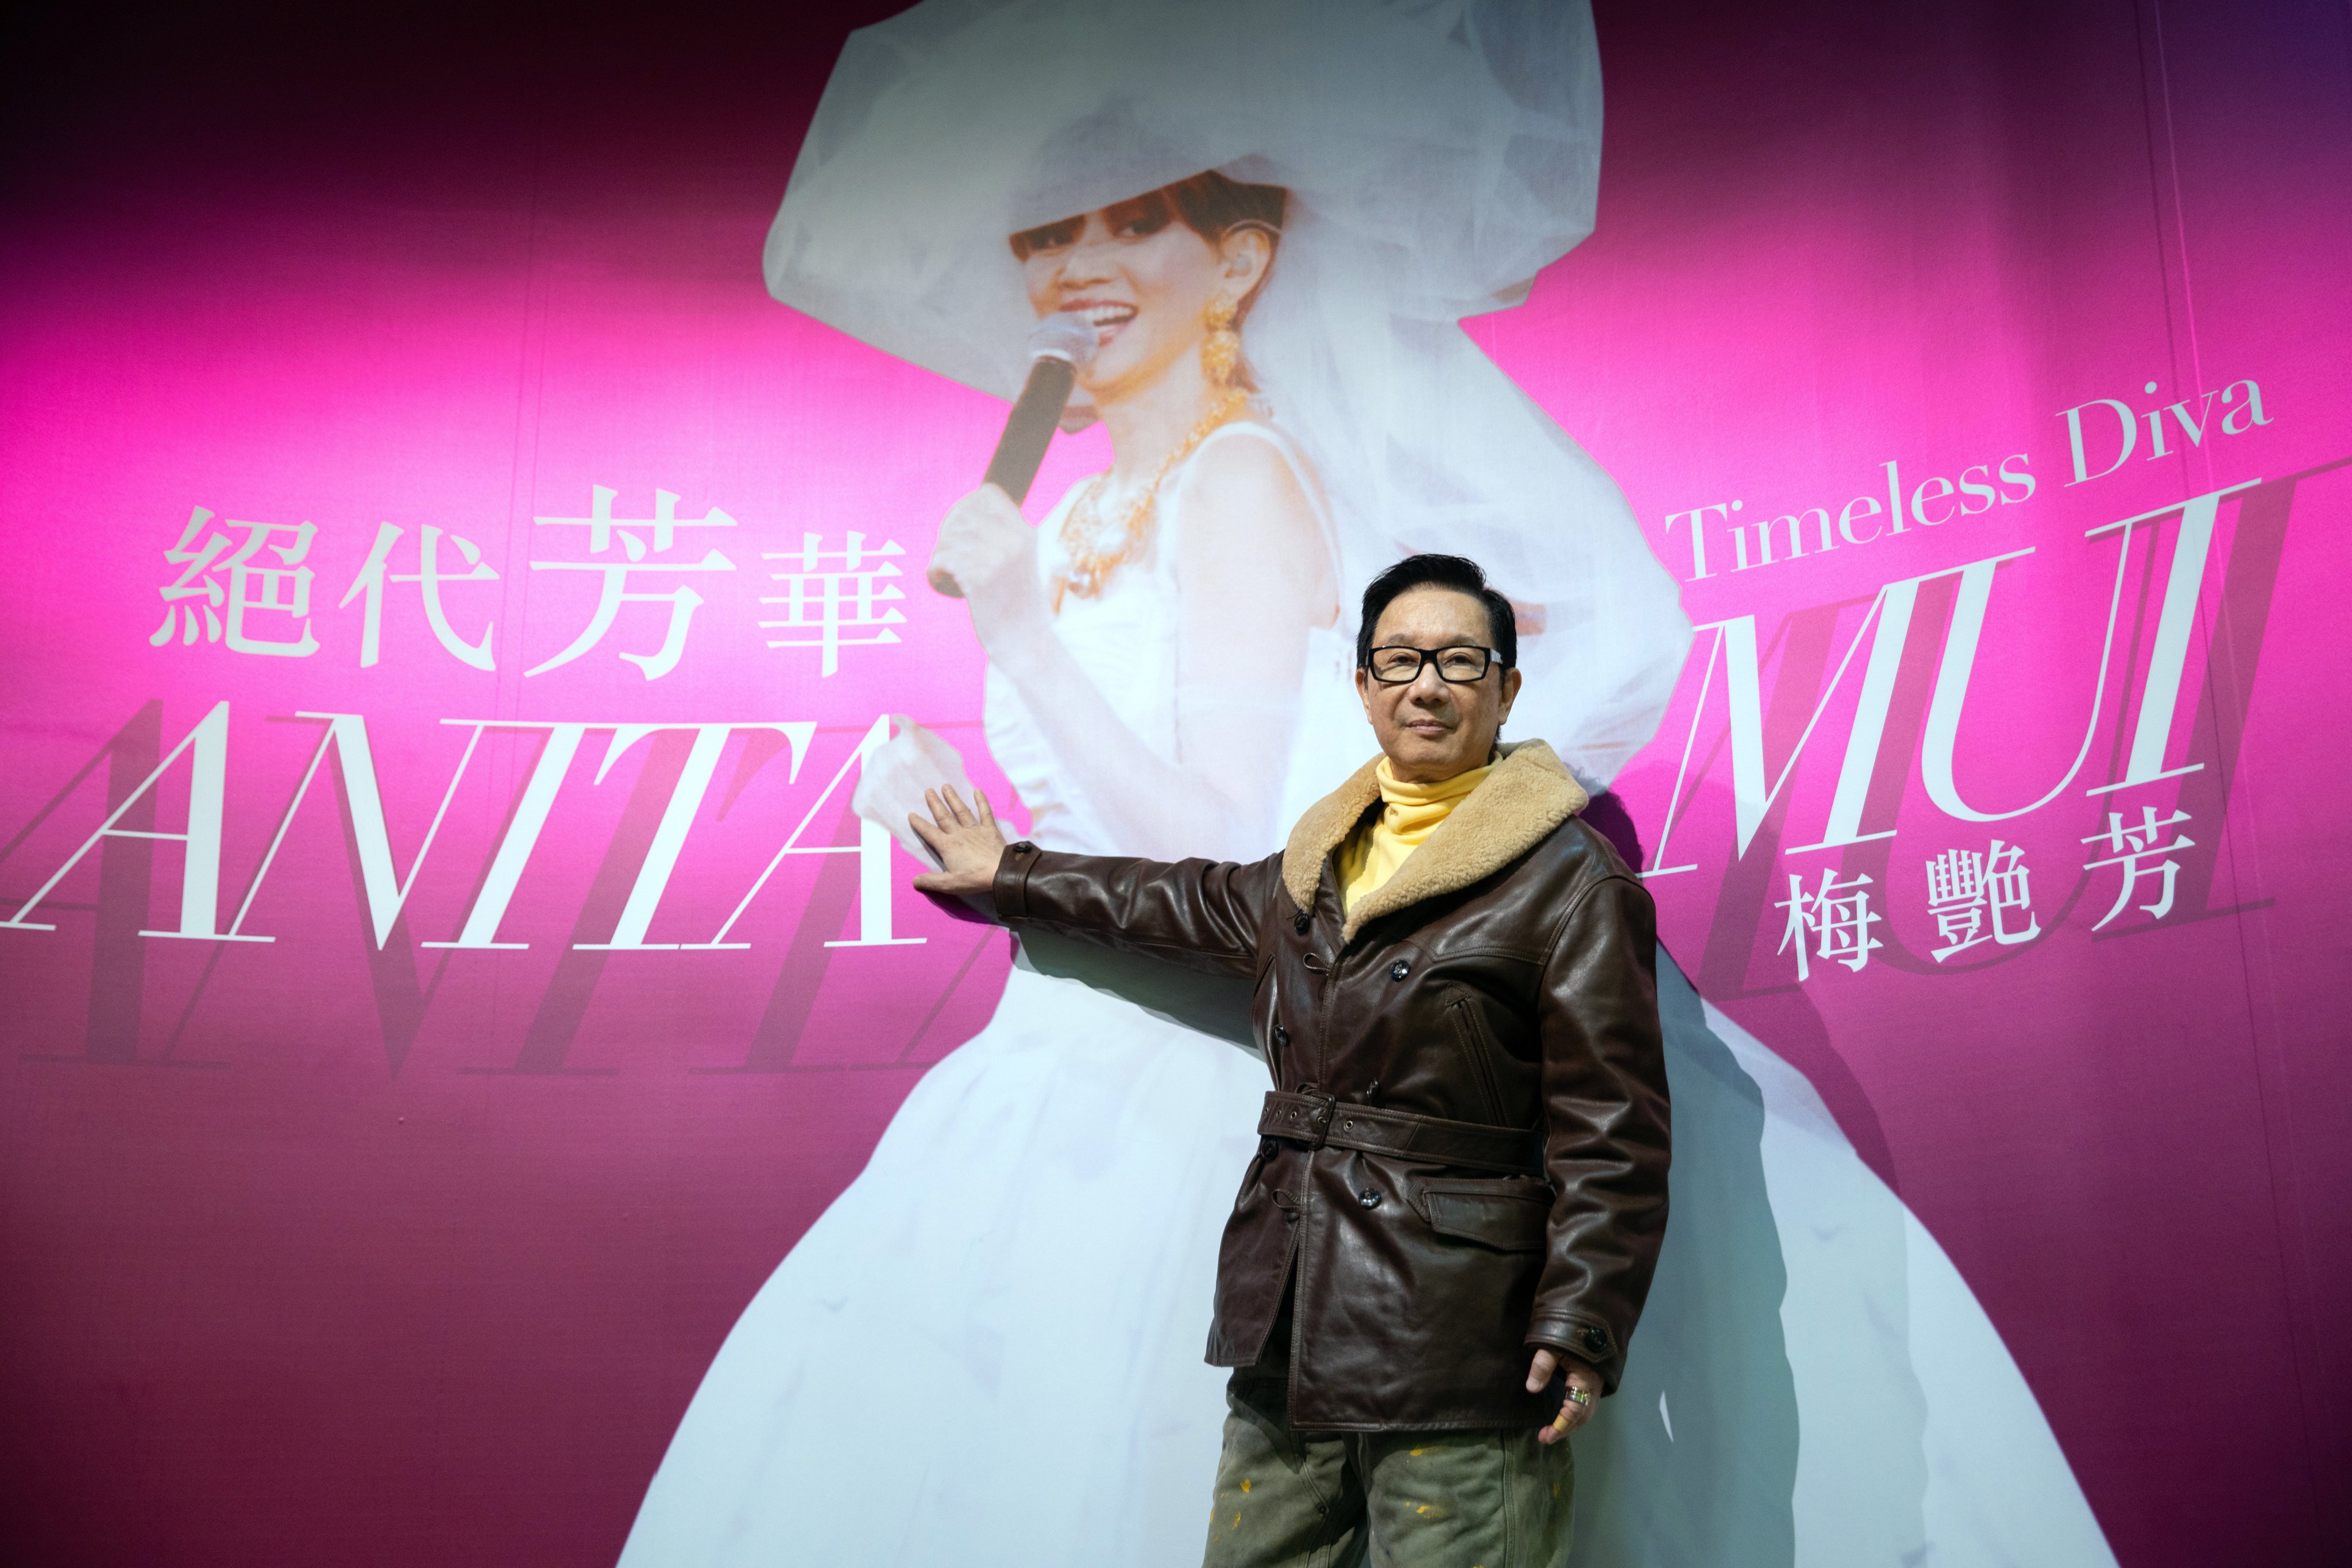 Many of Eddie Lau’s outfits for Anita Mui are being shown at the Hong Kong Heritage Museum for a temporary exhibition. Photo: Nathan Tsui